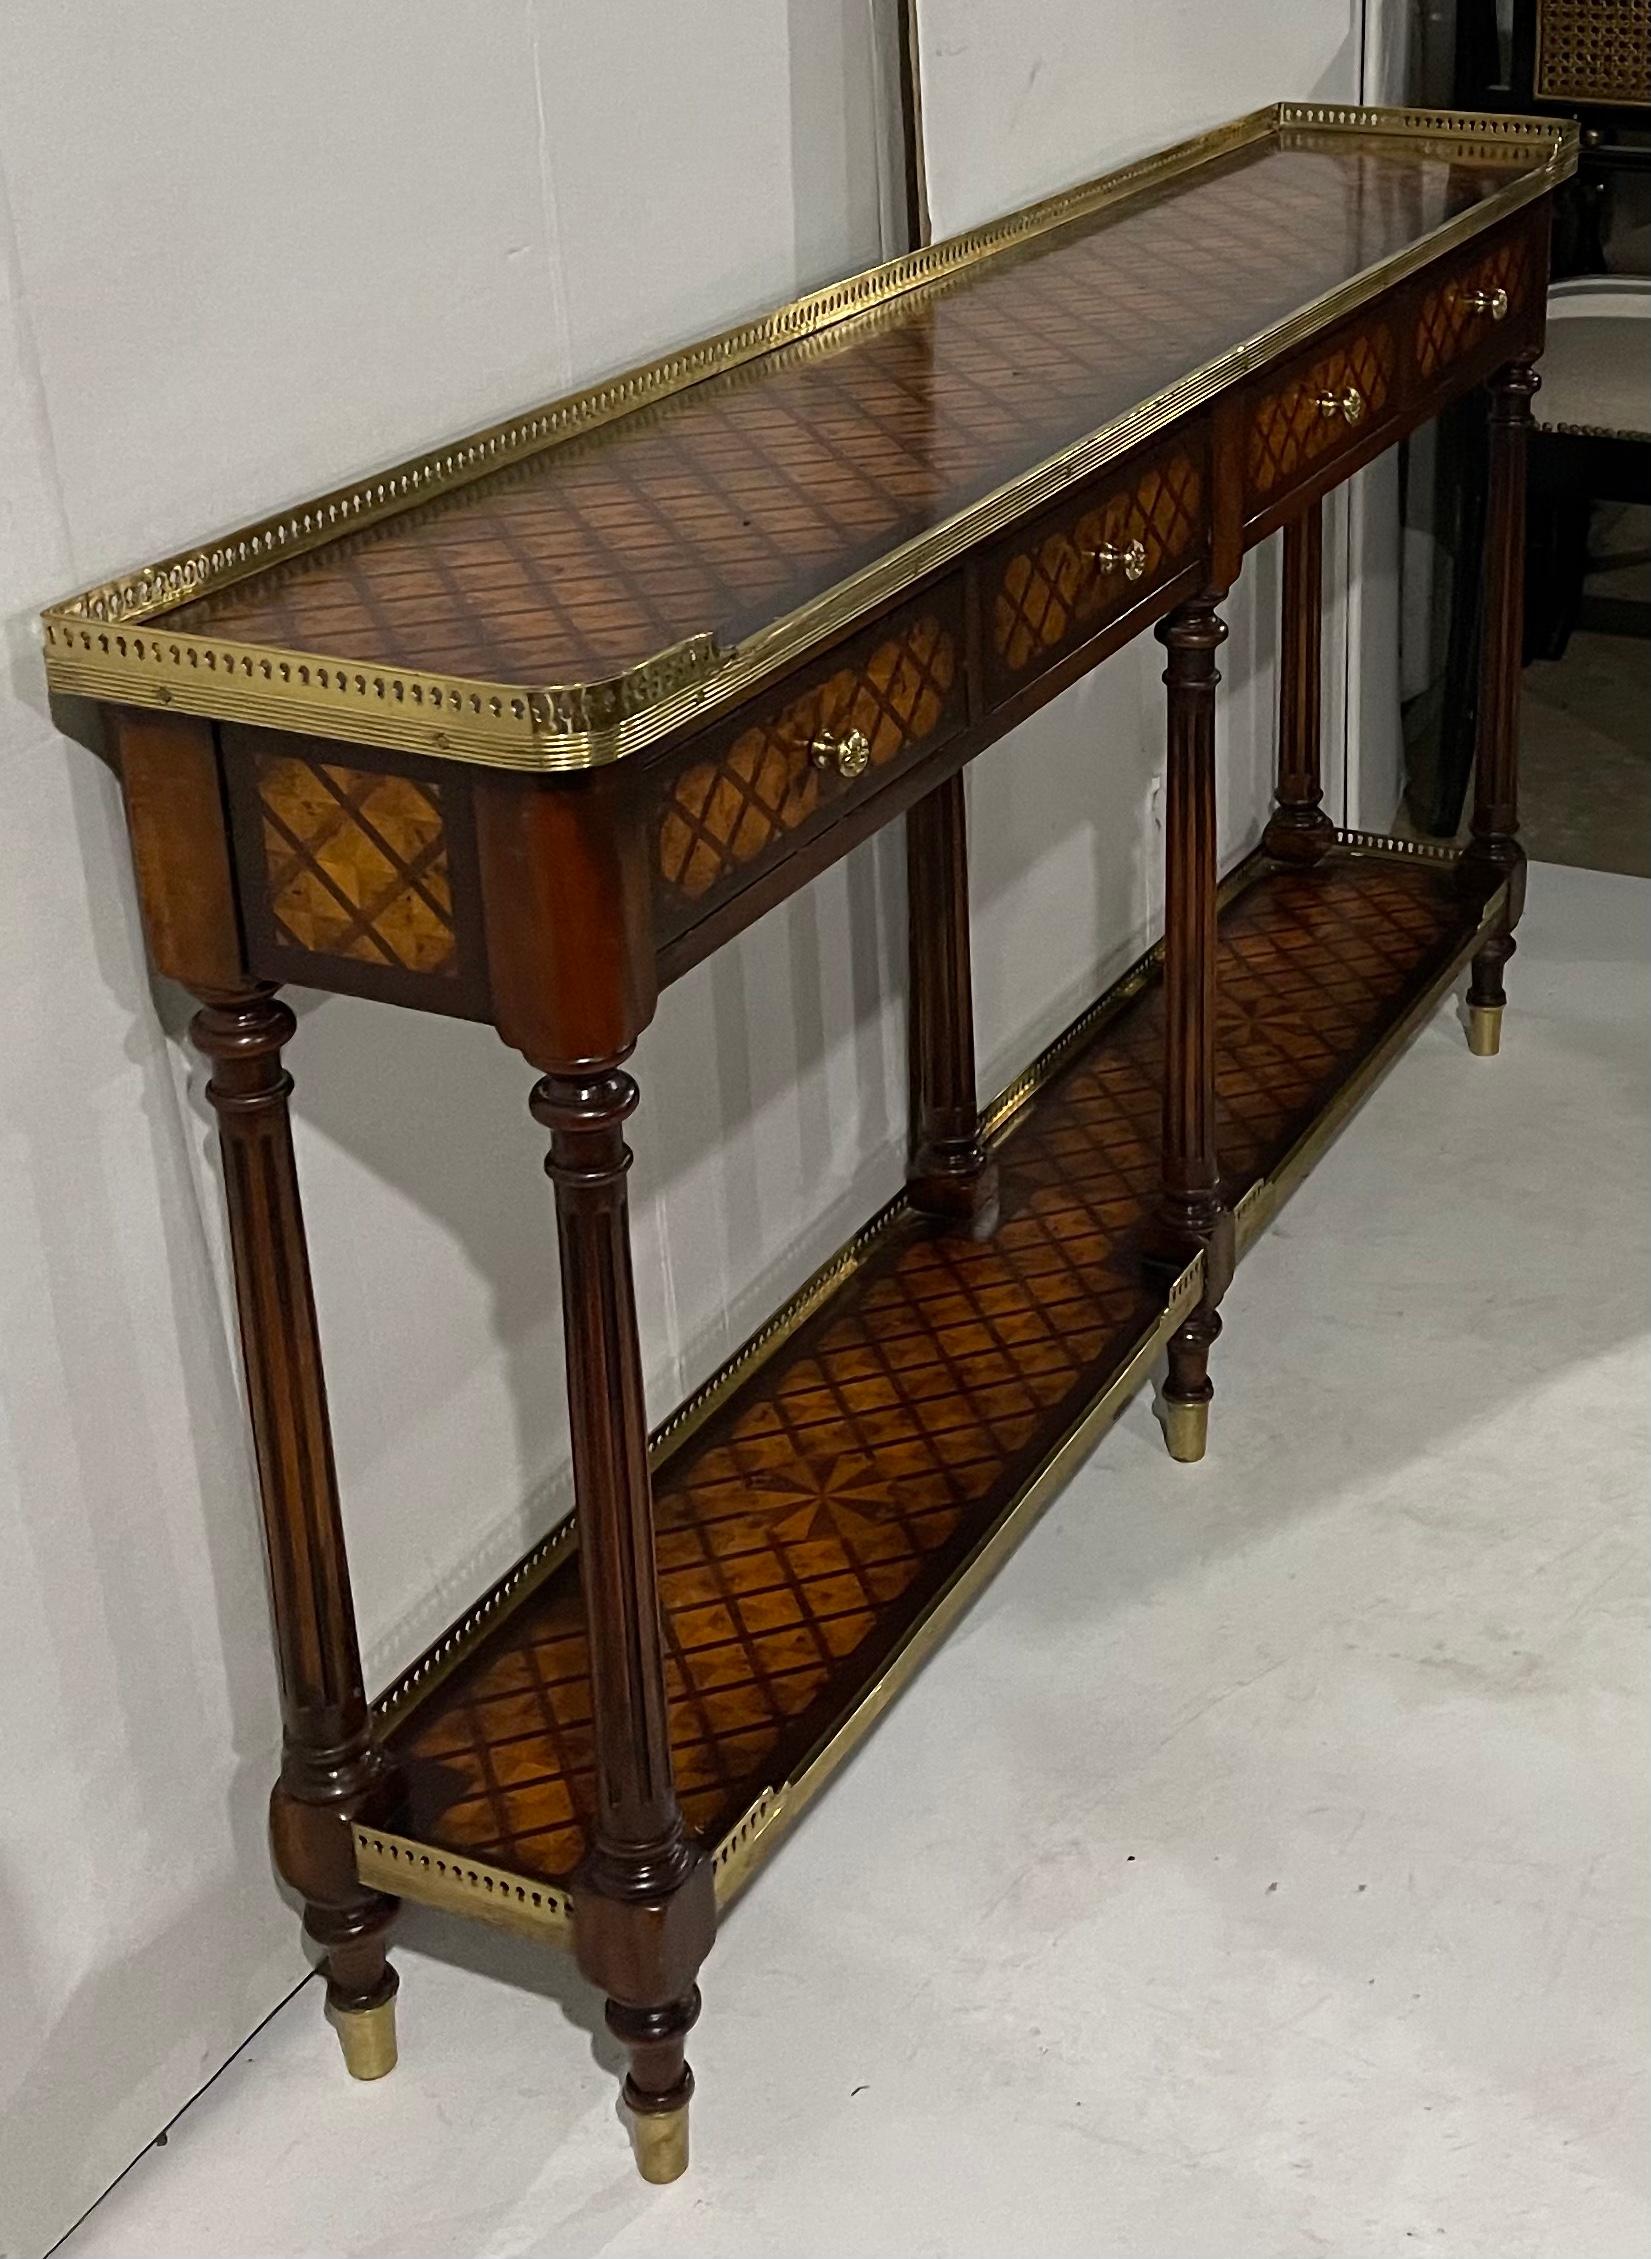 20th Century Regency Style Brass and Mahogany Inlaid Console Table Att. to Theodore Alexander